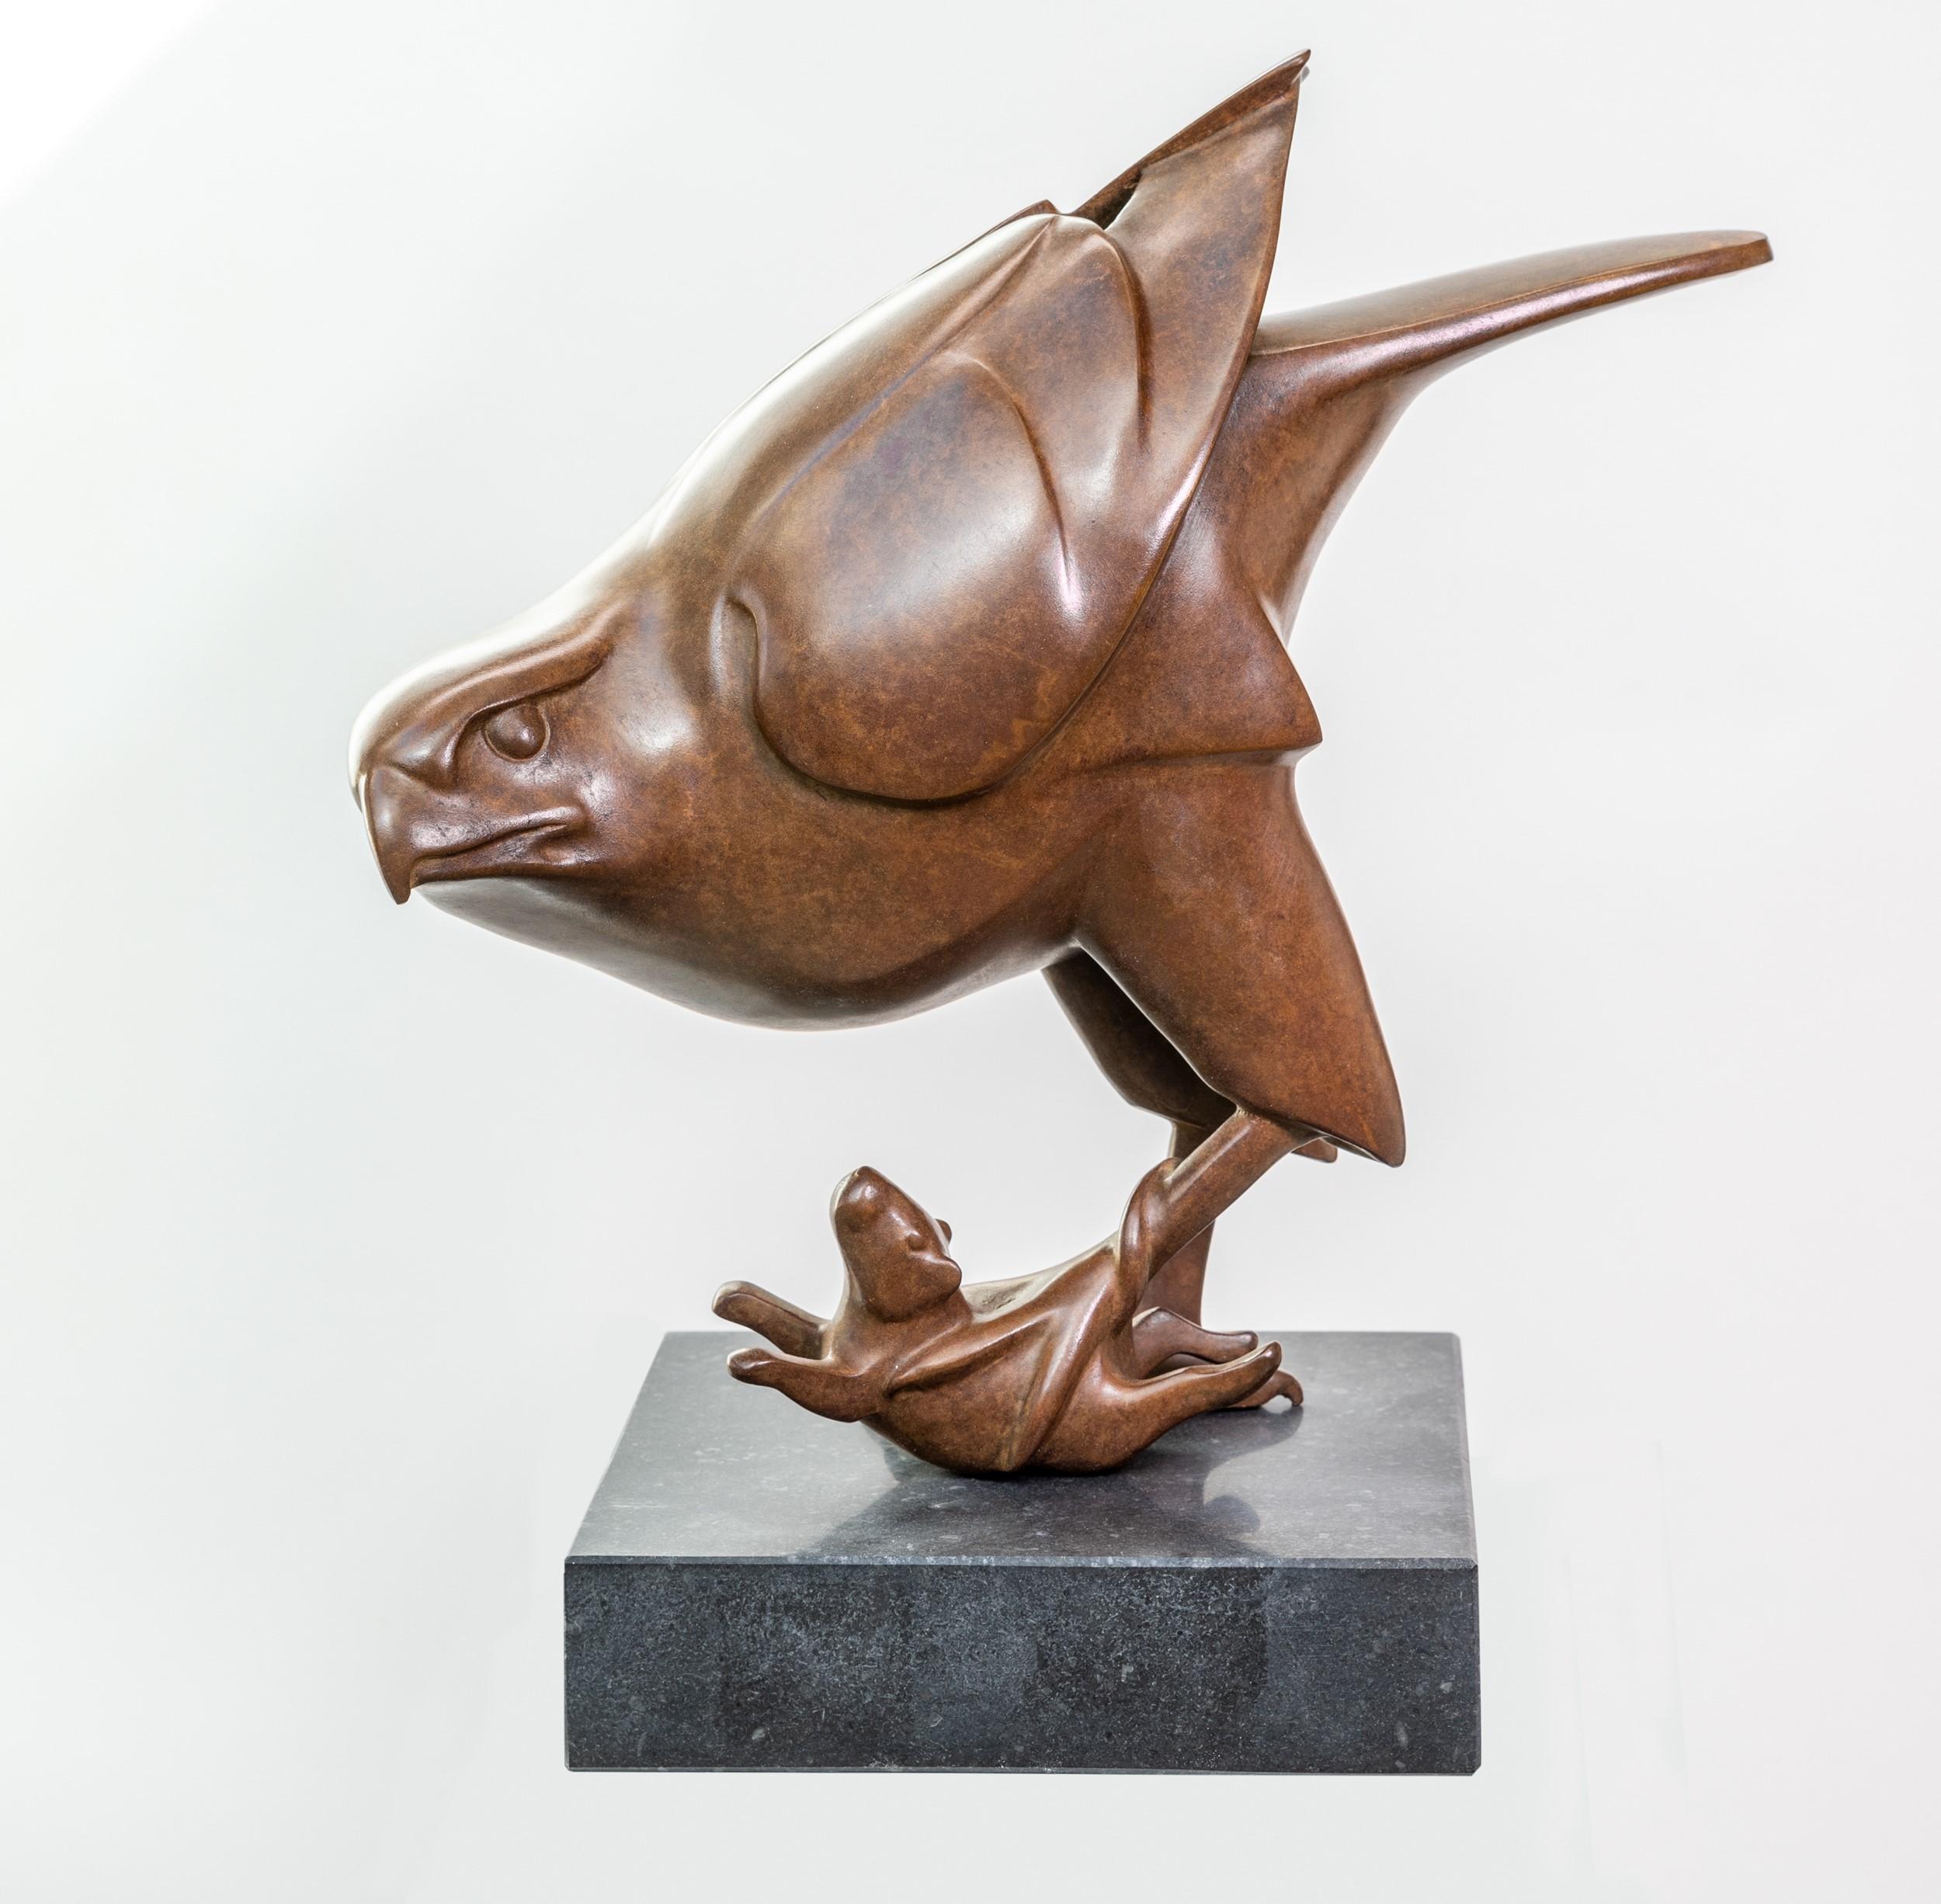 Roofvogel met Muis Prey Bird with Mouse Bronze Sculpture Animal Bird Limited Edition

Evert den Hartog (born in Groot-Ammers, The Netherlands in 1949) followed his education to be a sculptor at the Rotterdam Academy of Visual Arts. In the years